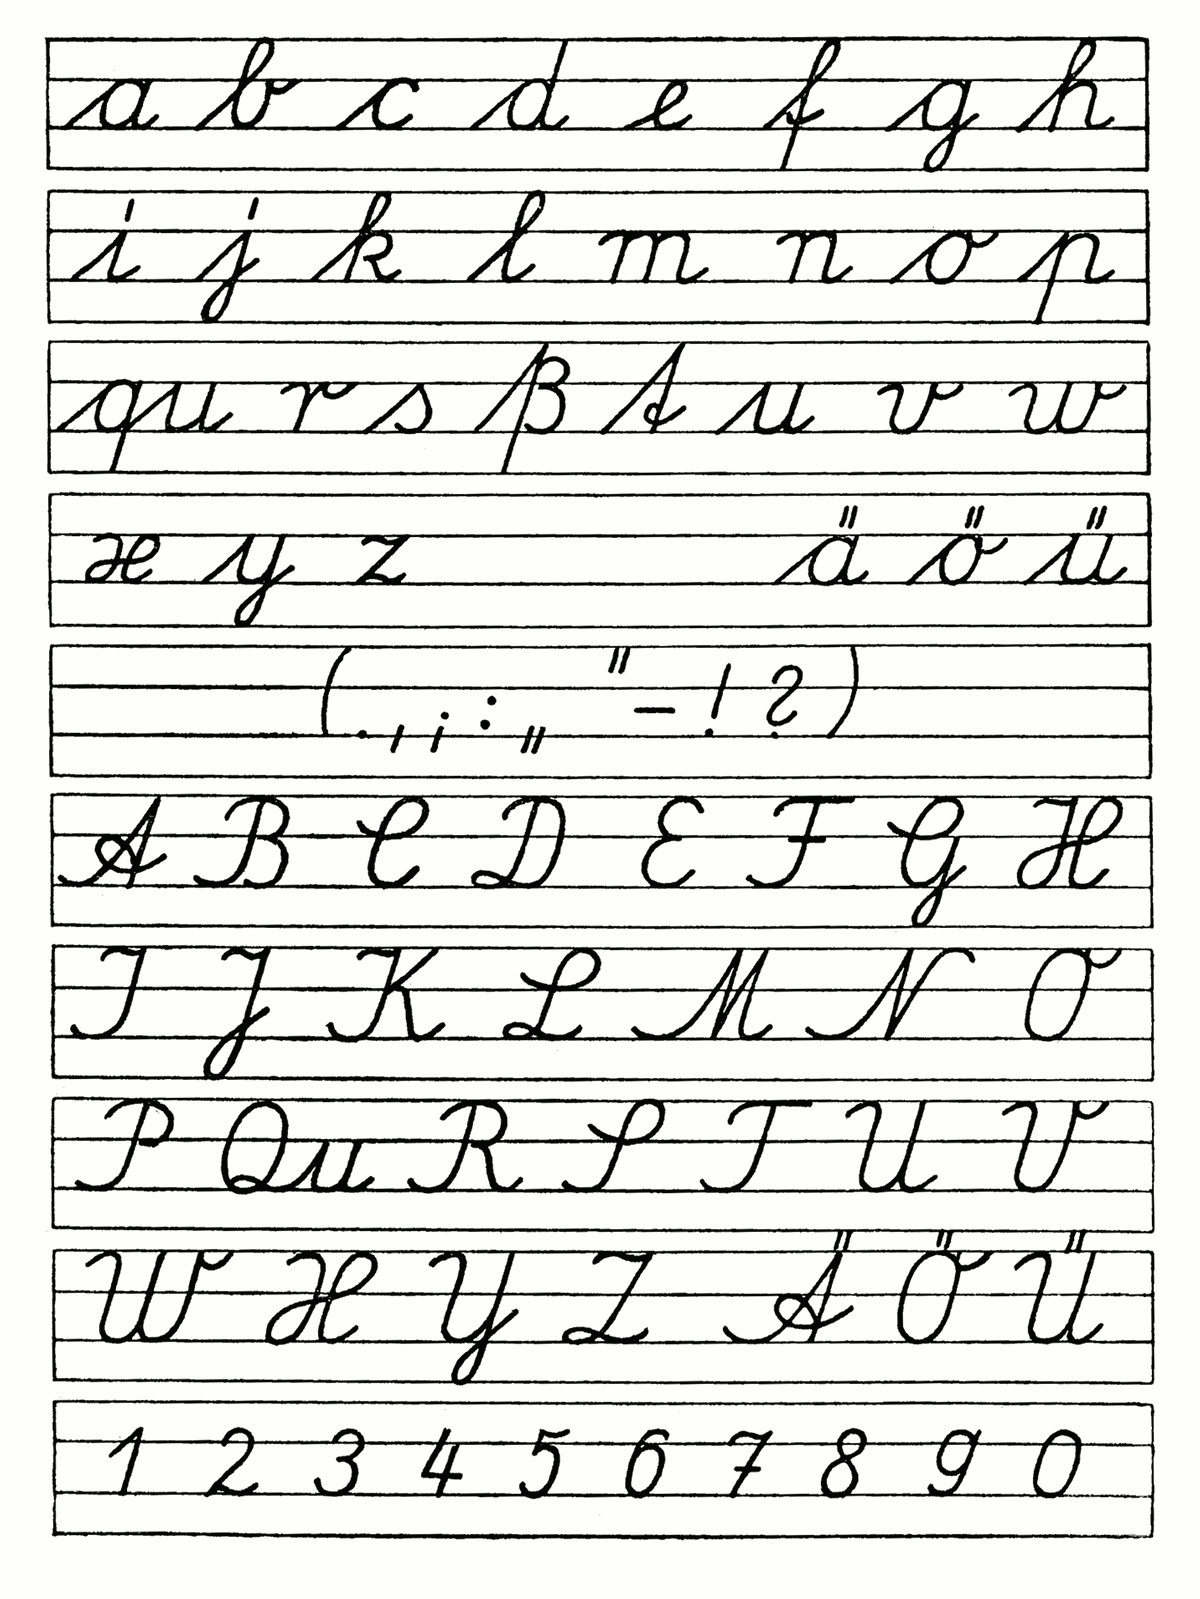 Wikipedia Gdr Handwriting - Link To Discussion Of Different